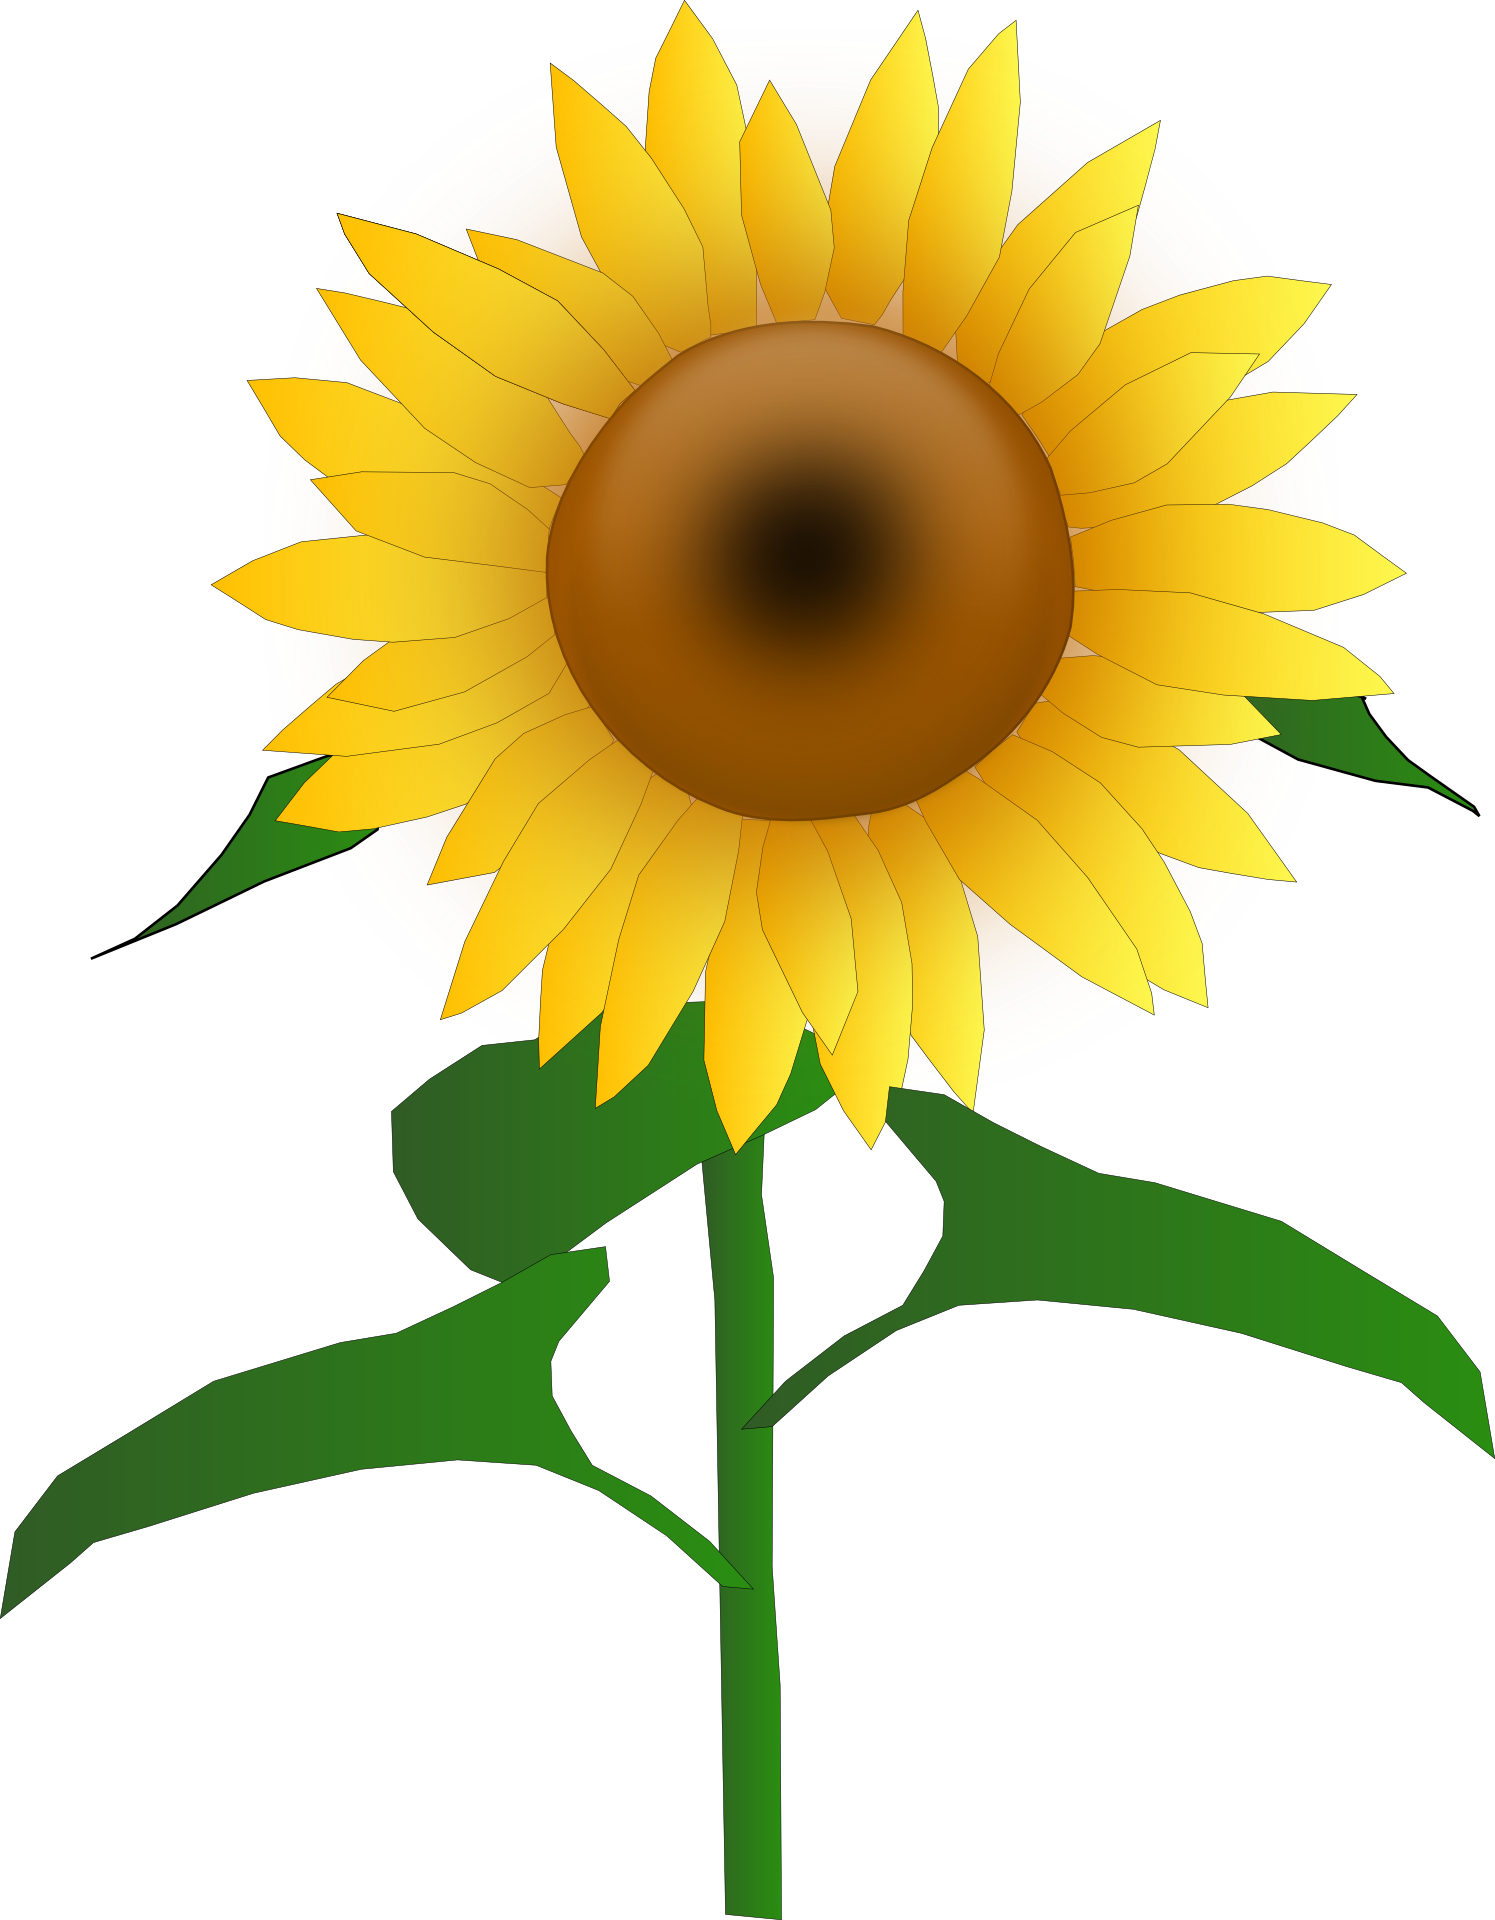 Sunflower PNG Clipart Picture